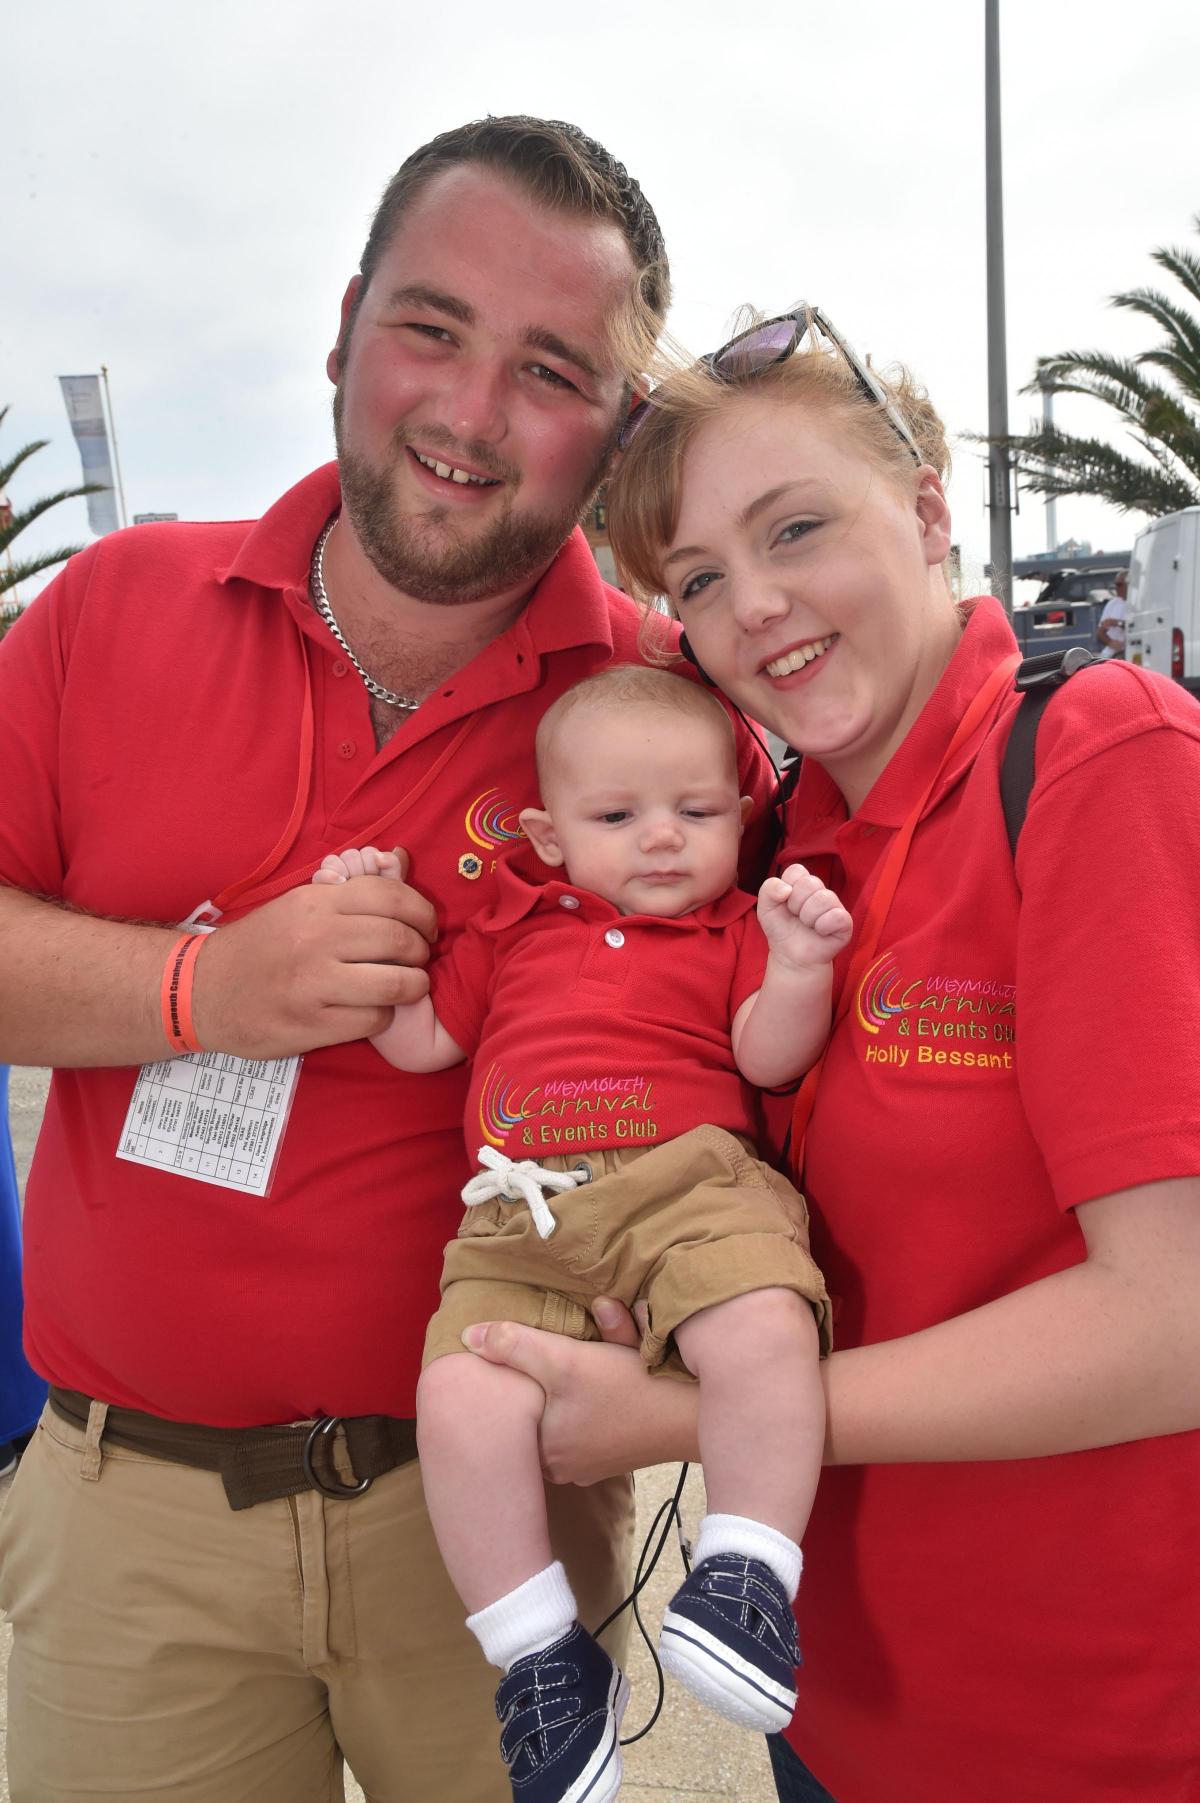 A FAMILY BUSINESS: Councillor Ryan Hope, with his partner Holly Bessant and their son Lewie